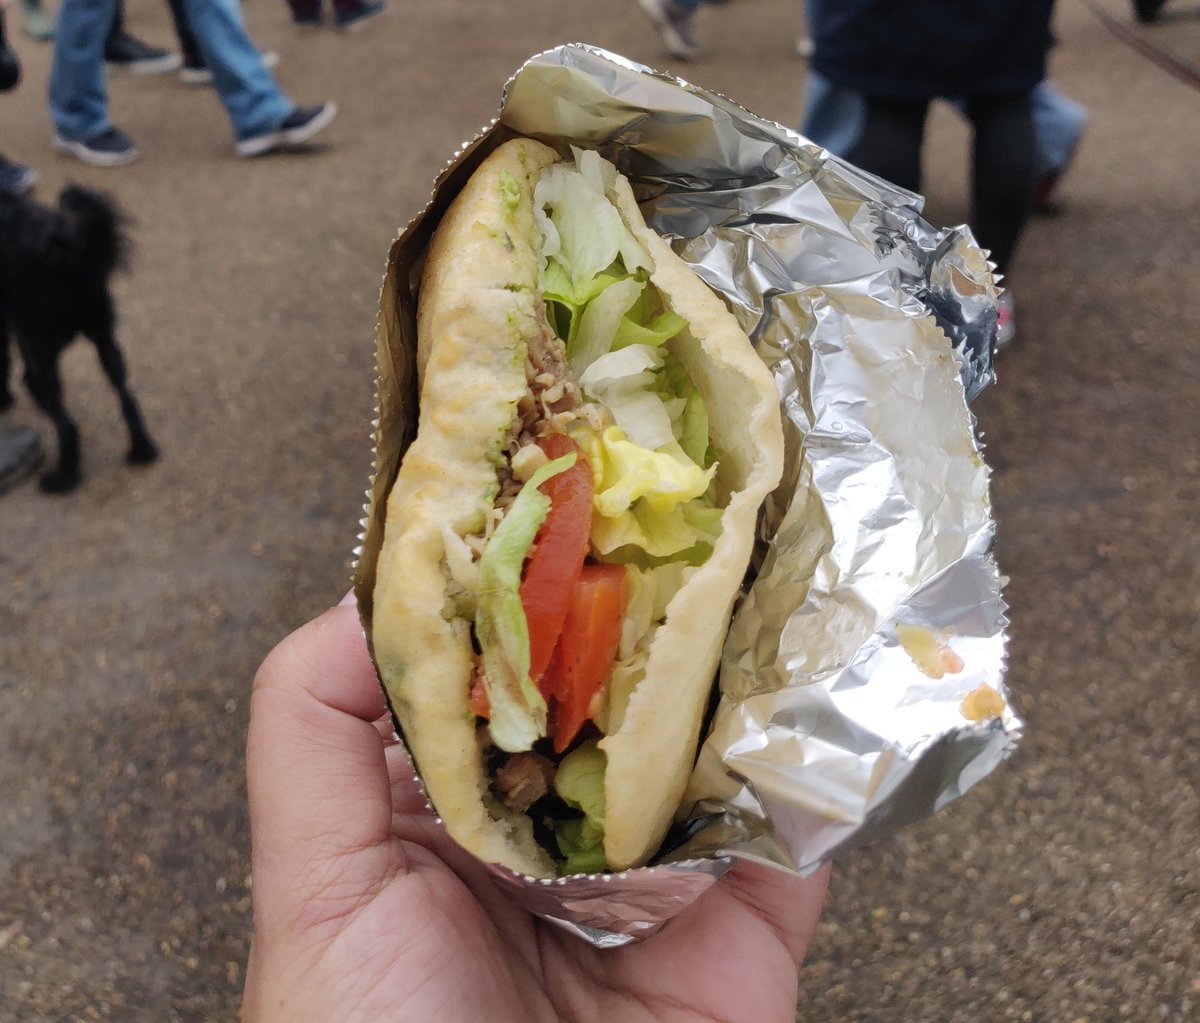 Bokit at Bokit'la (a pop-up food stall)A sandwich made with fried dough (again, imagine crisp bhatura) stuffed with chicken, lettuce, tomato and sauces. A Caribbean street-snack from Guadeloupe, a French archipelago which has culinary influences from various parts of the world.